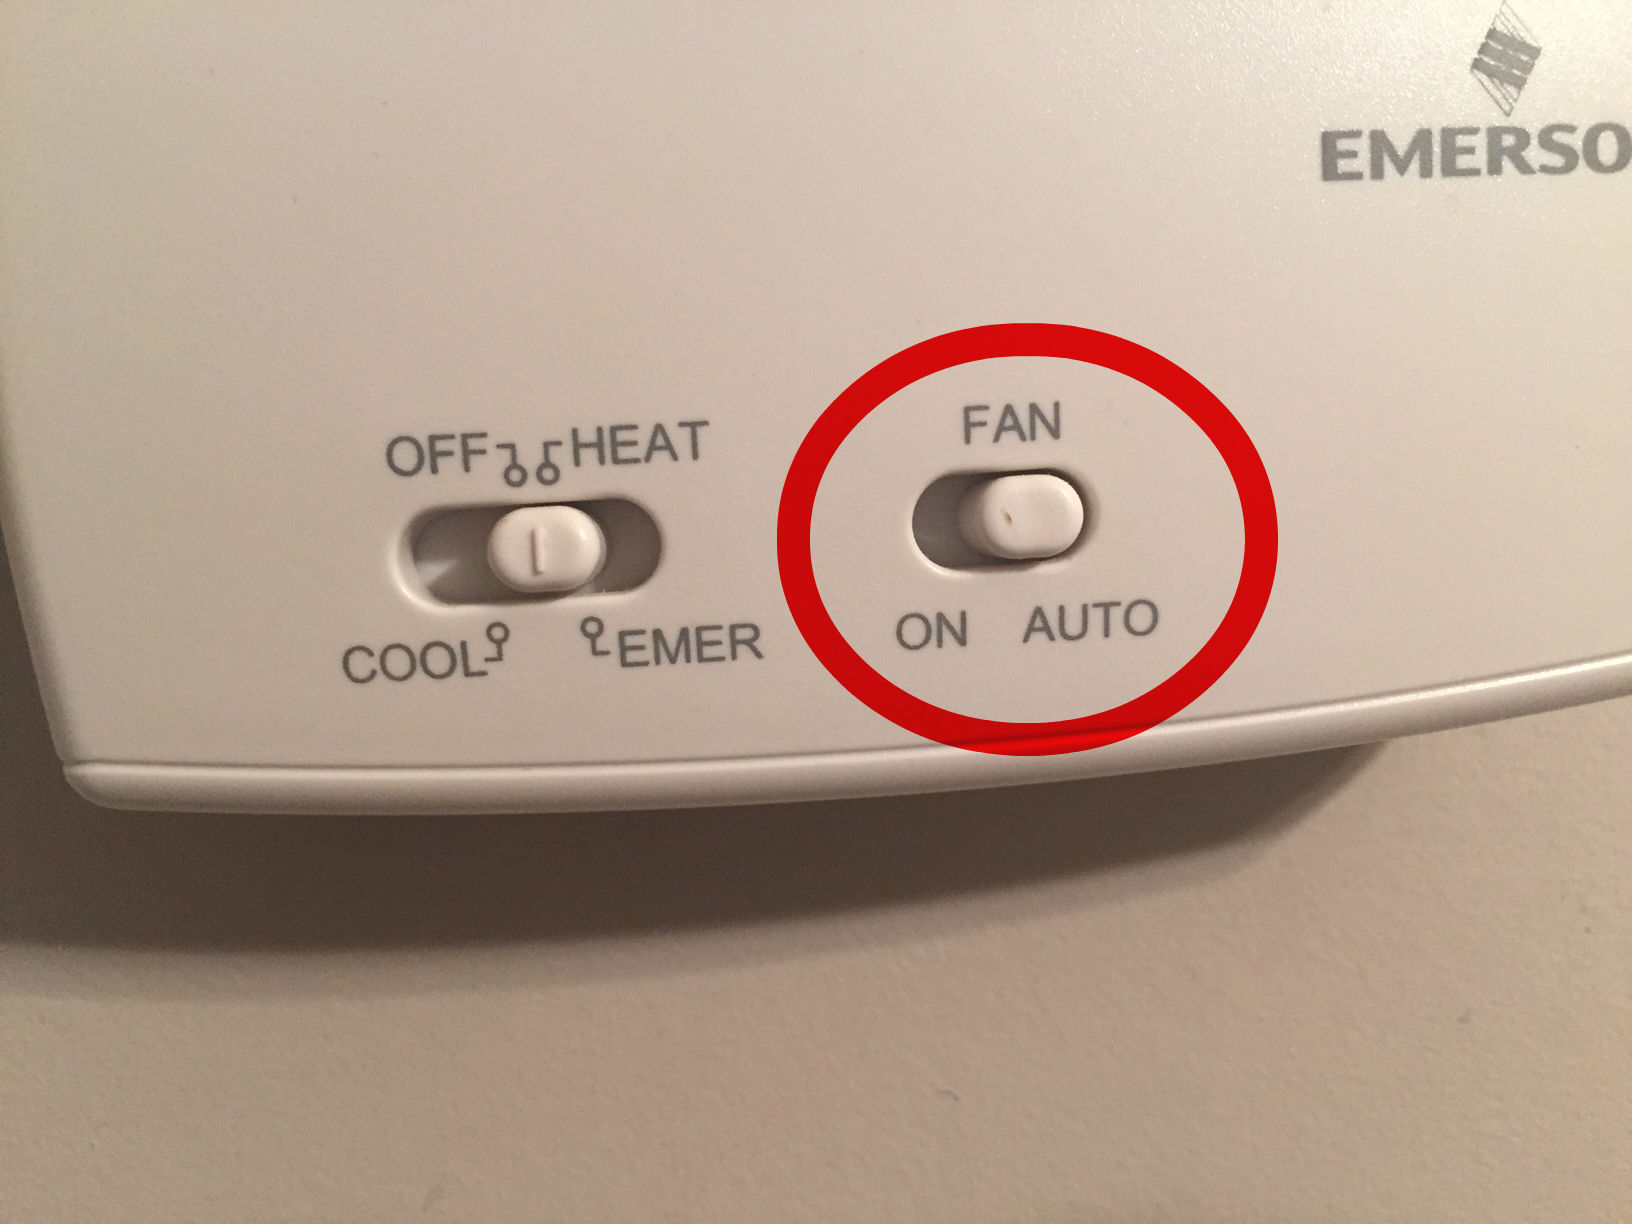 thermostat fan set to auto